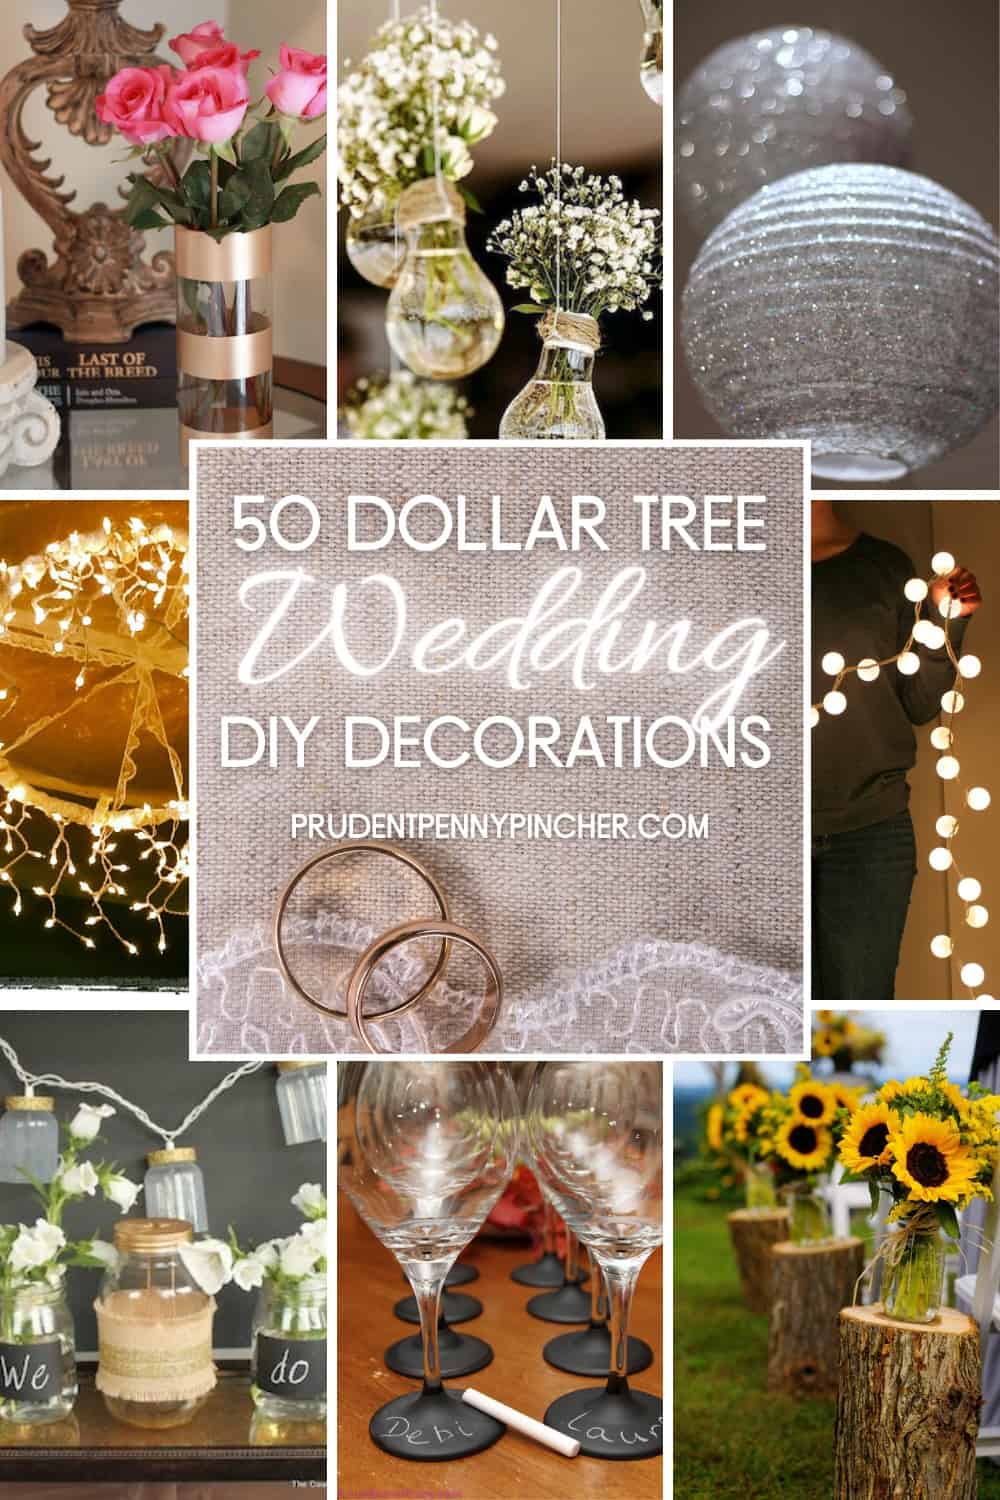 Rustic Wedding Ideas That Are DIY & Affordable